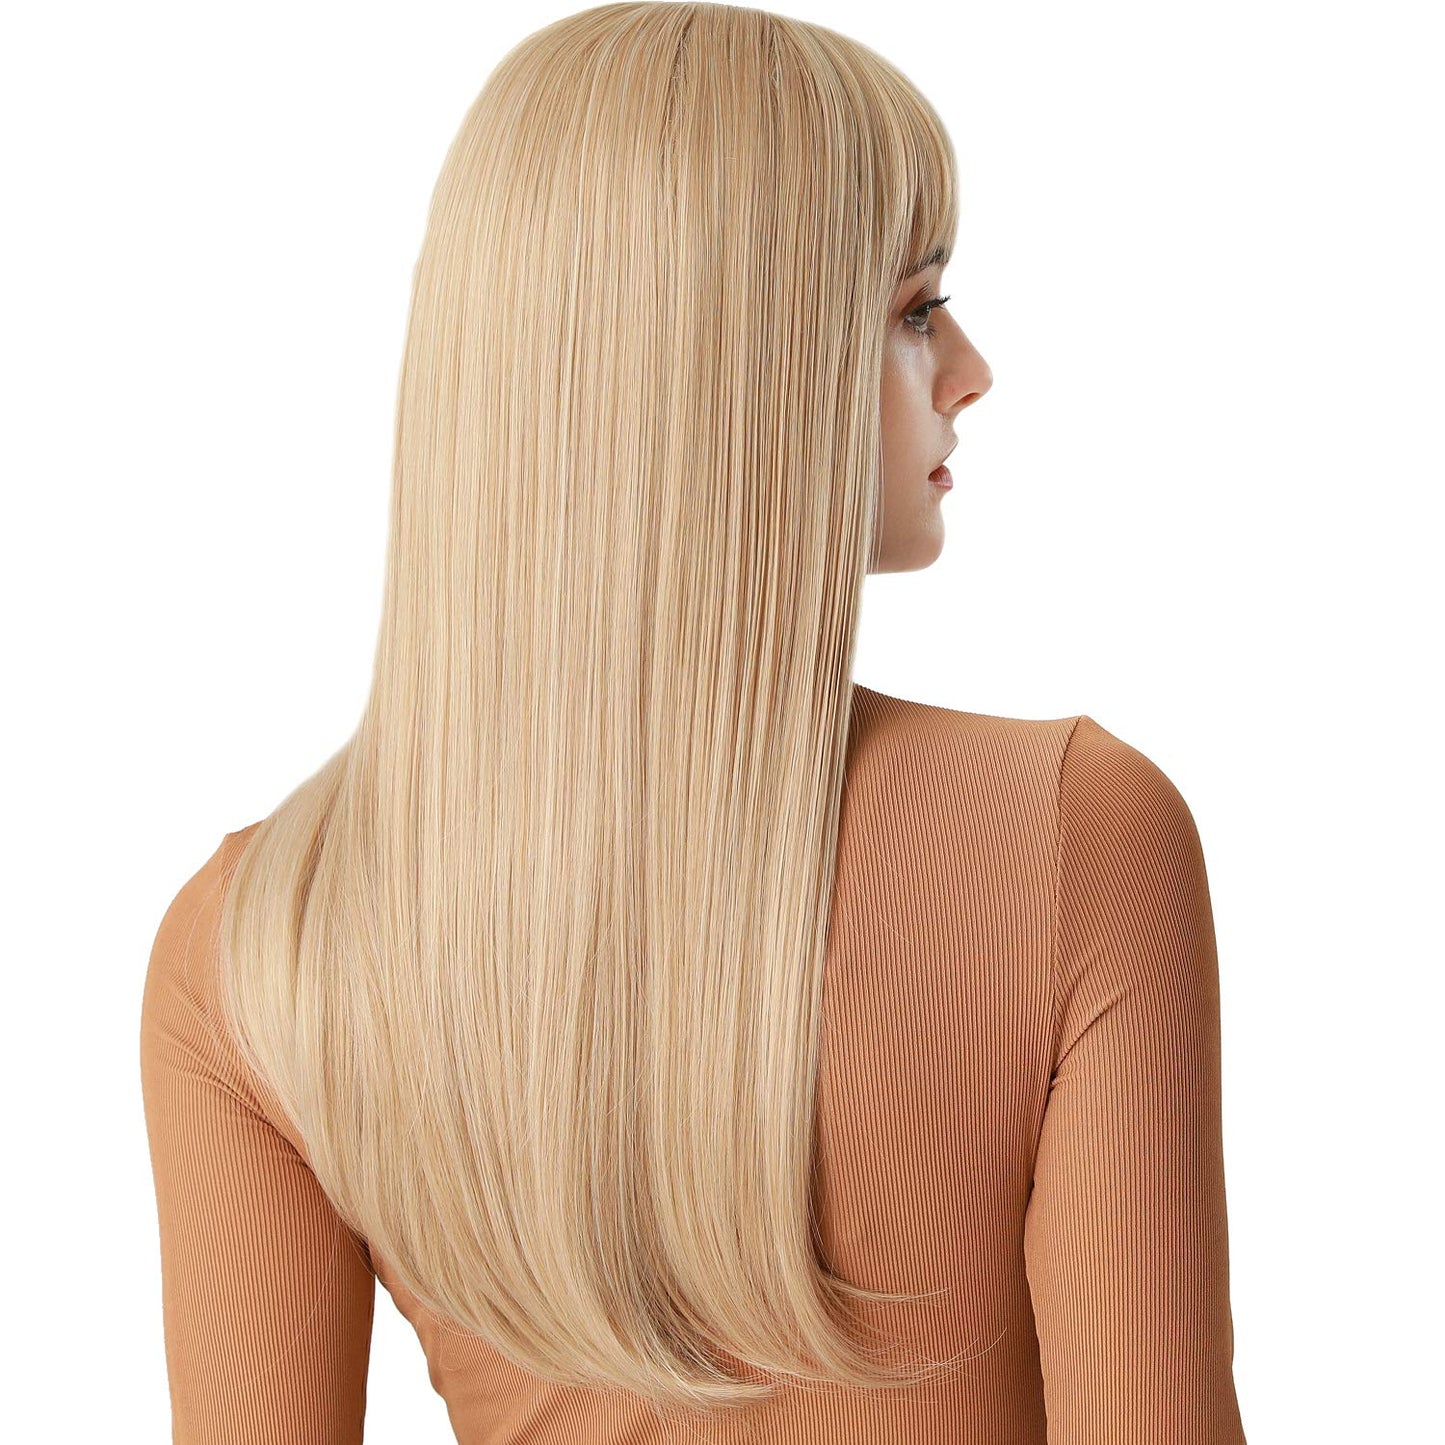 Lush Locks A Long Straight Wigs Blonde Synthetic Hair with Bangs for Women.